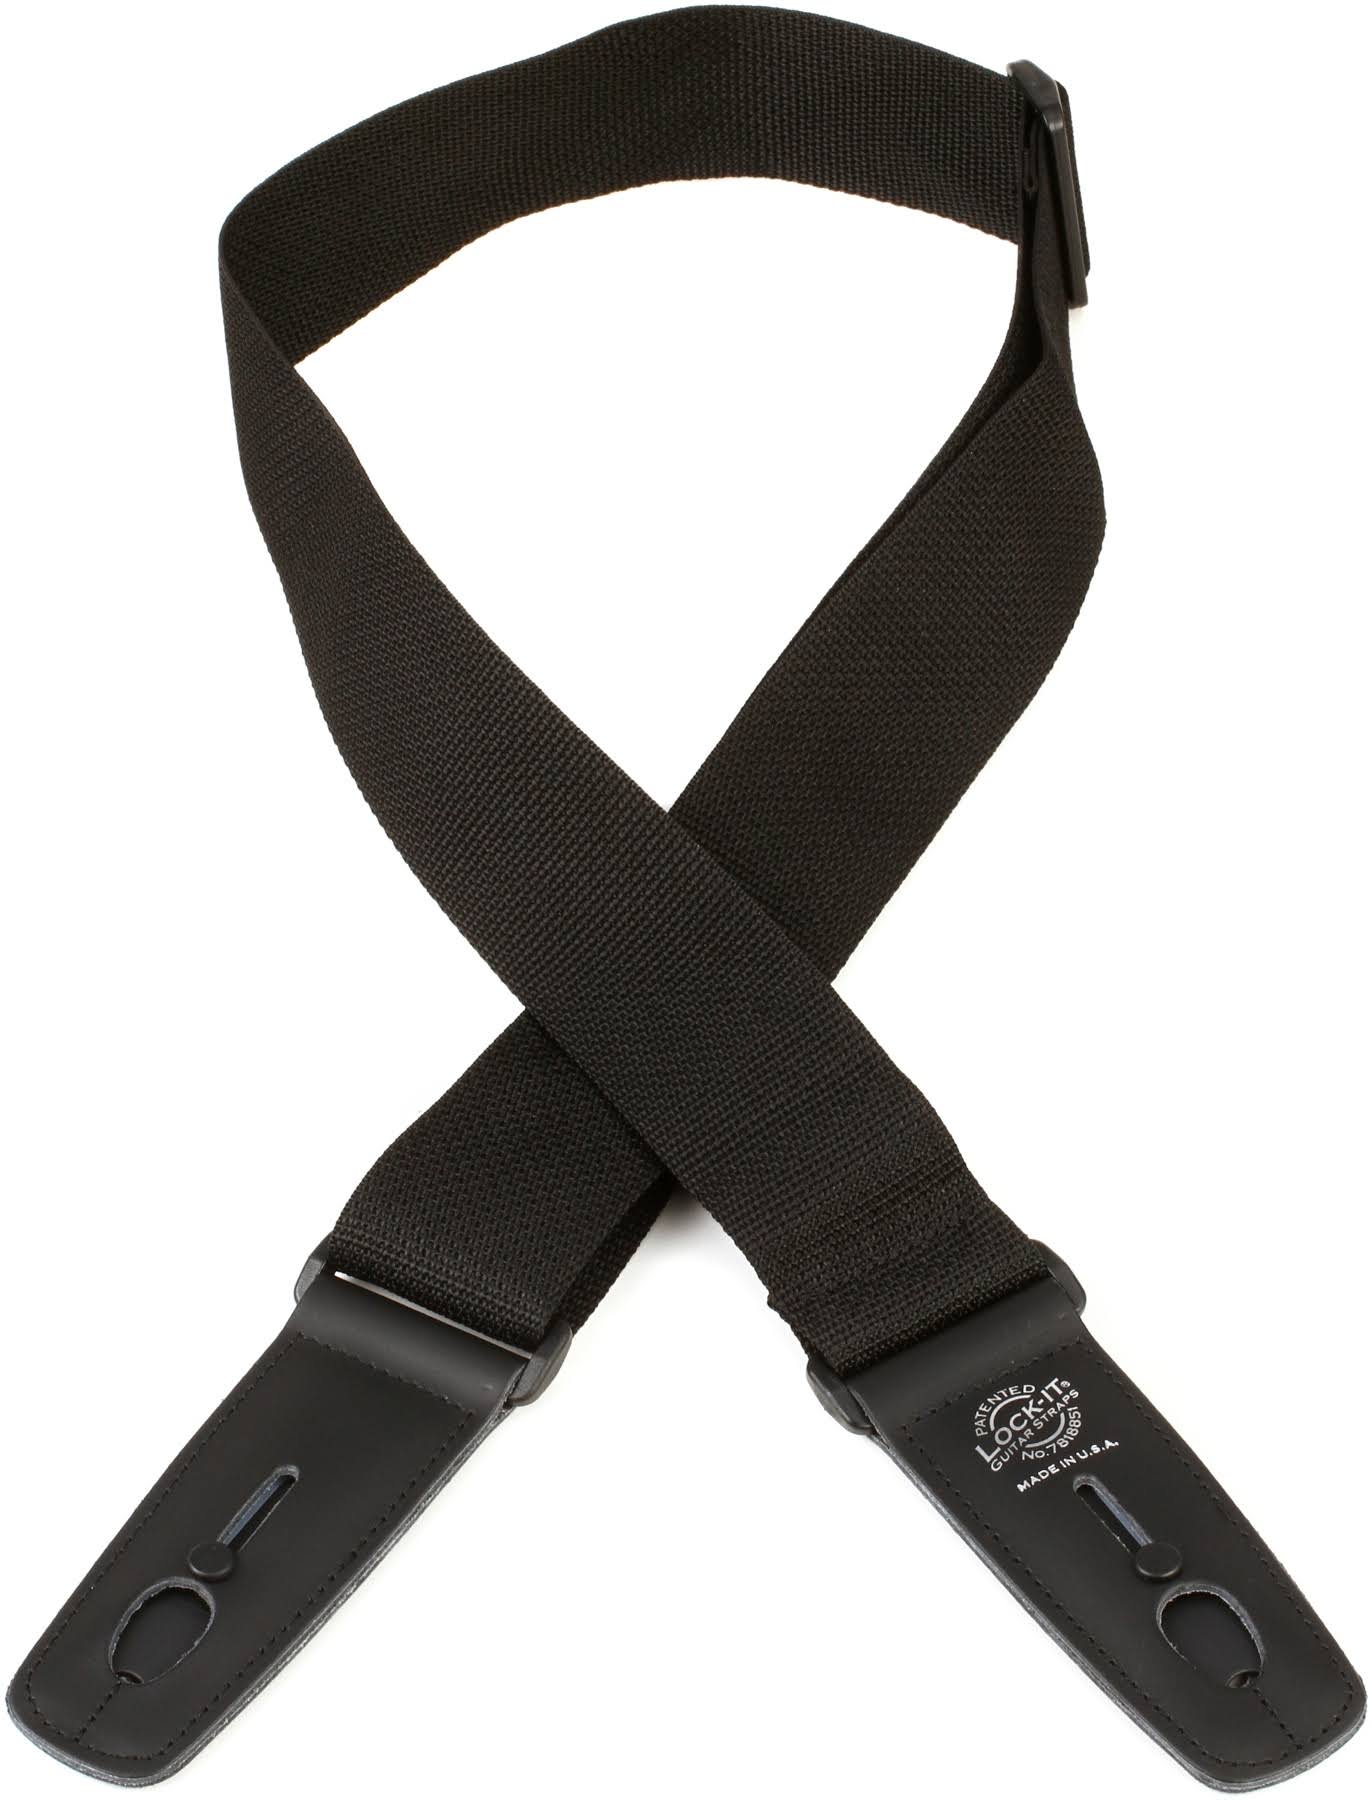 Lock It Professional Polypro Strap - With Locking Ends, Black, 2"